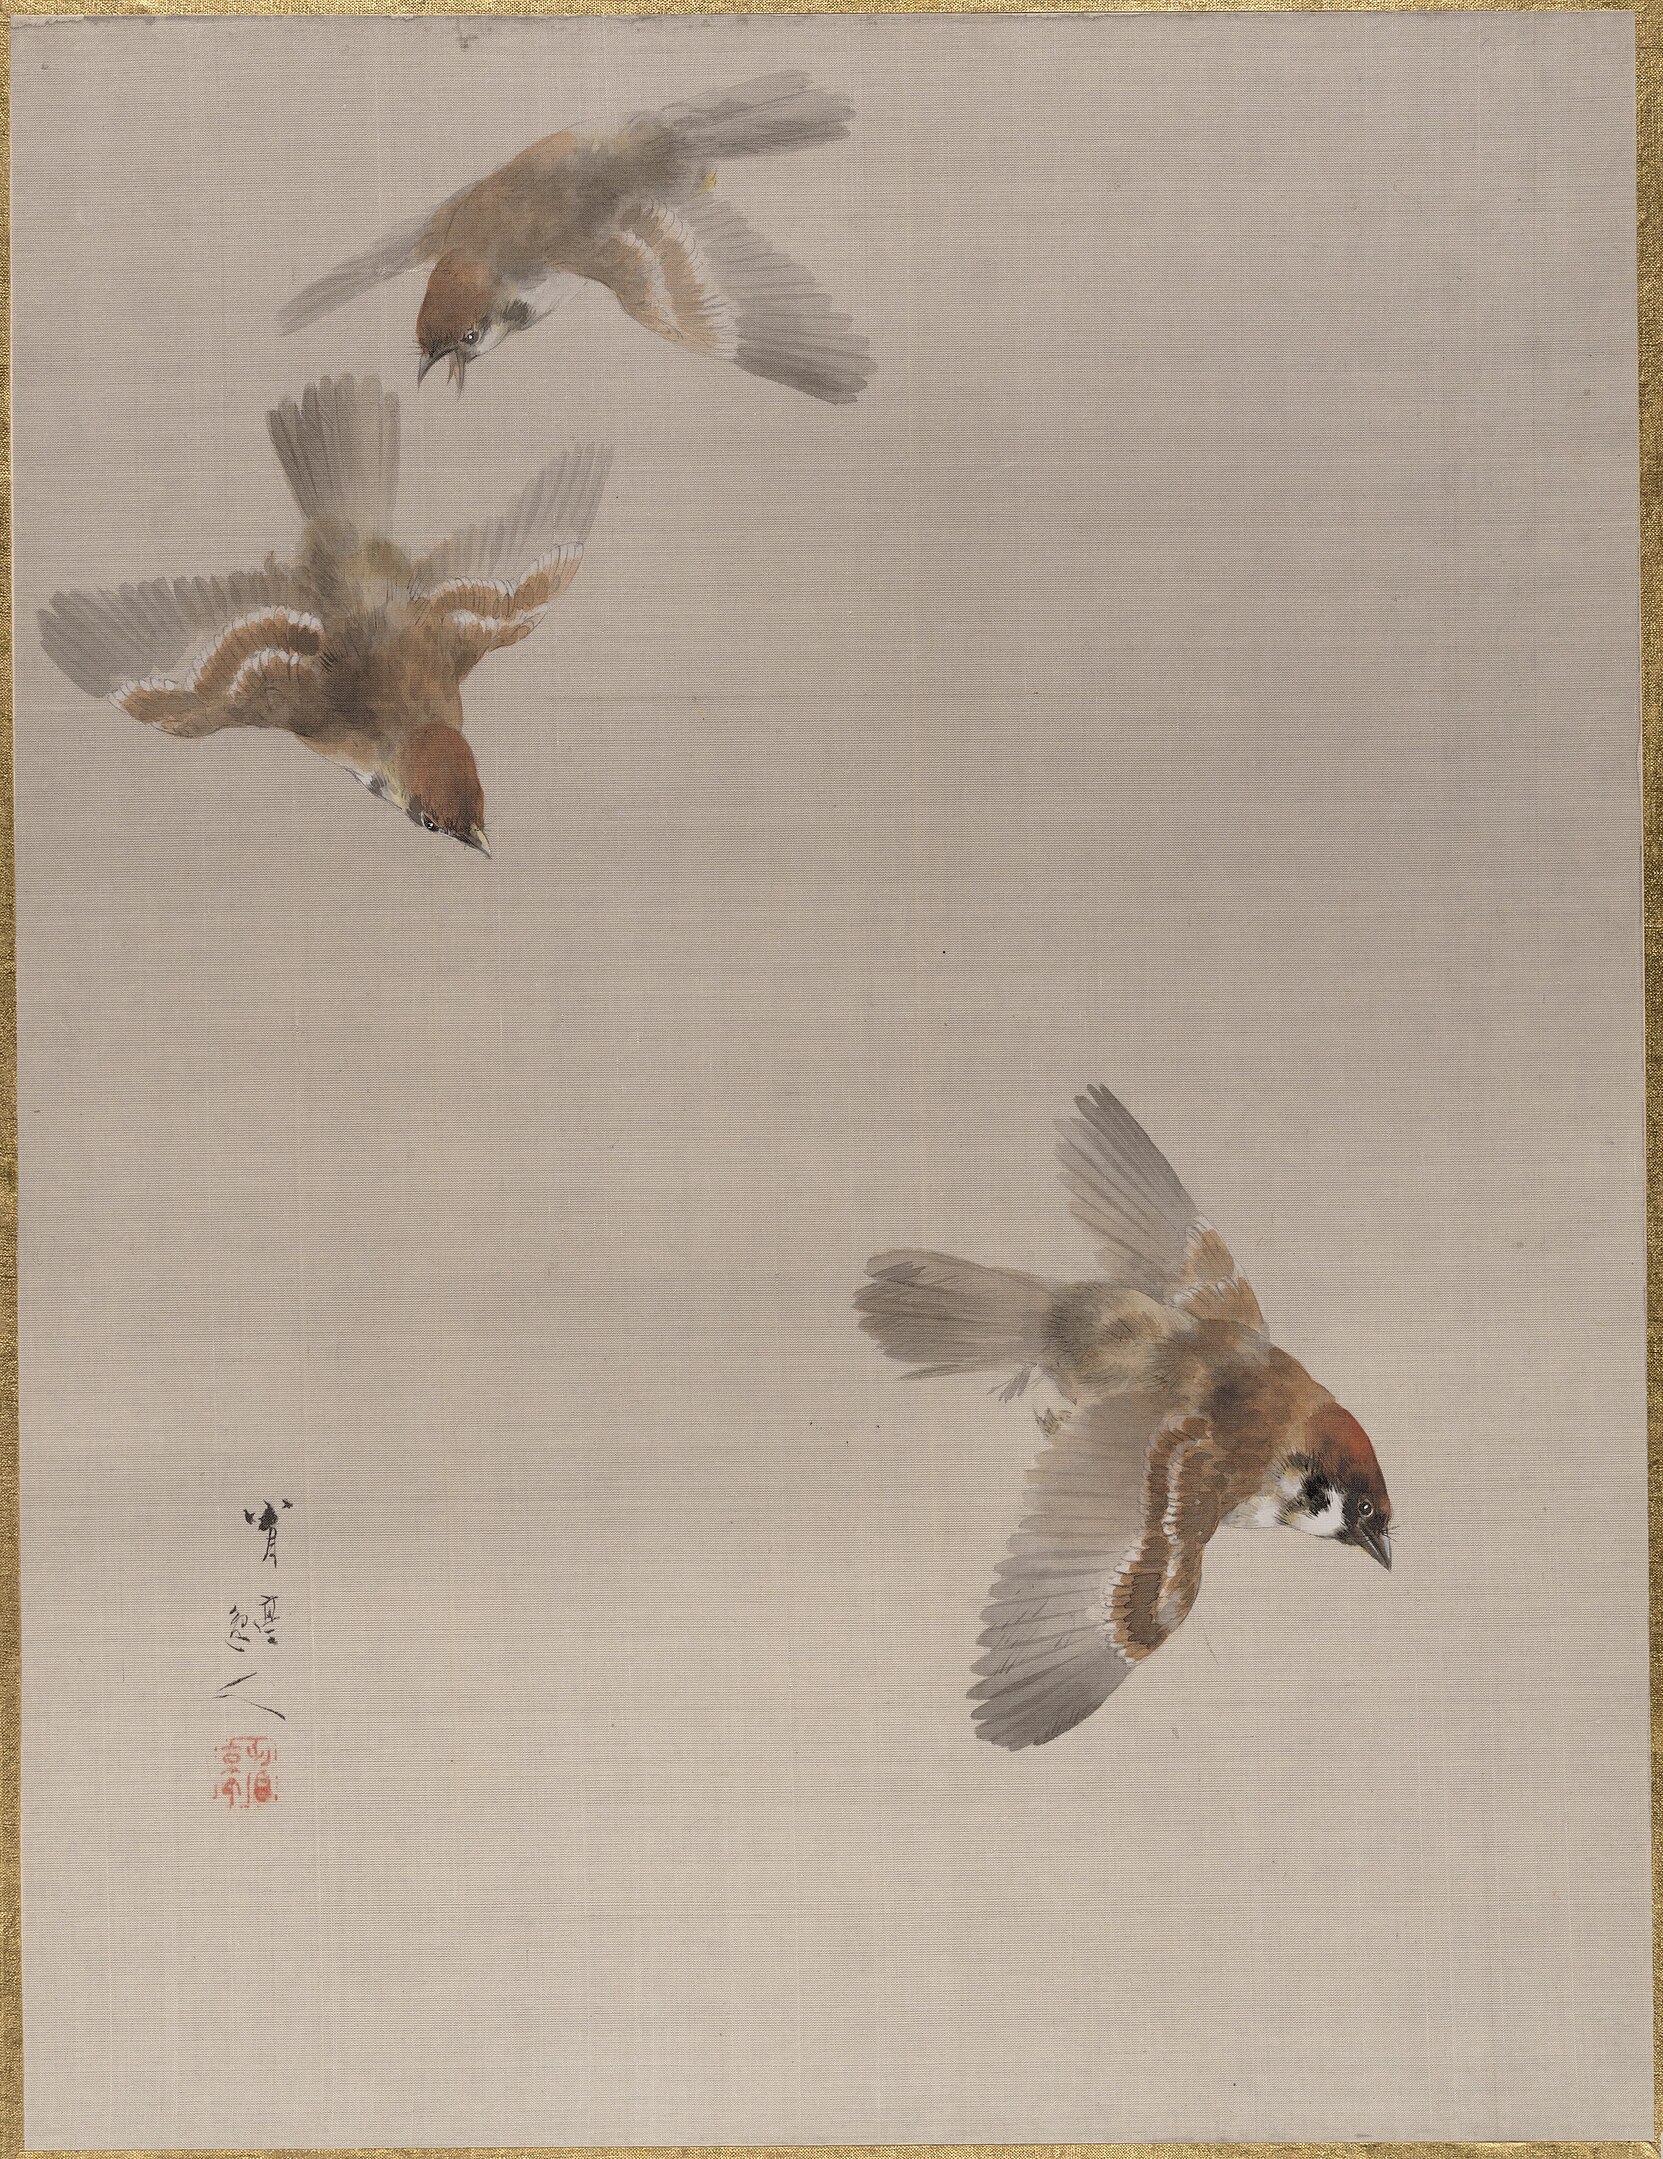 Three sparrows flying